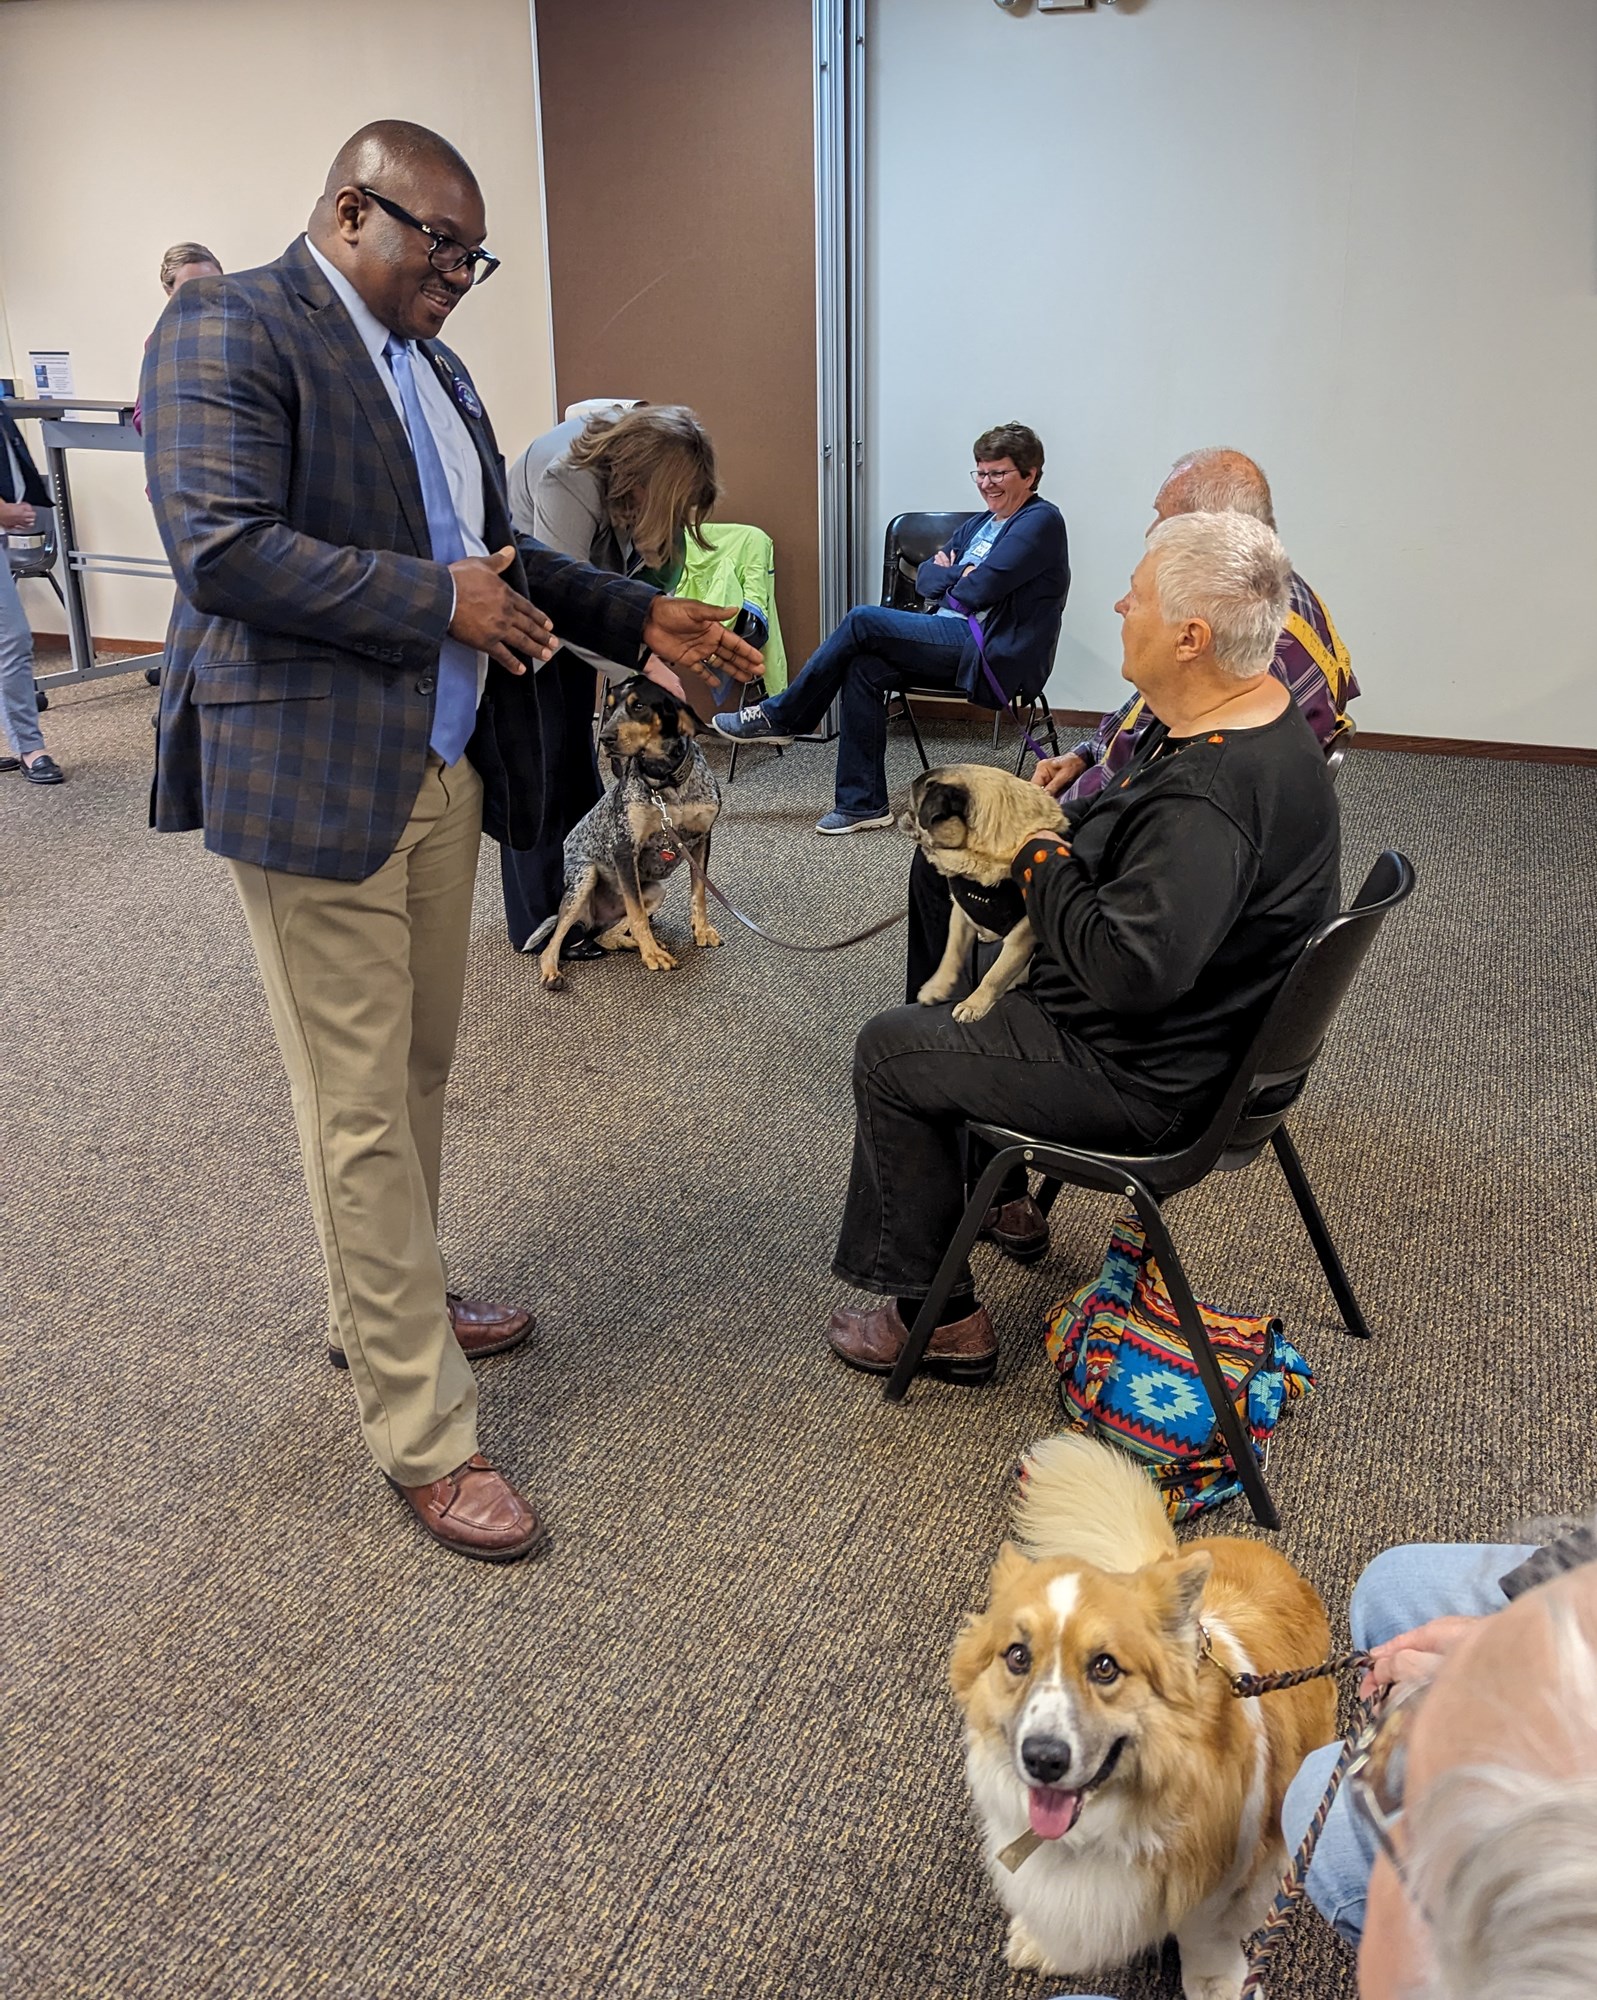 Photo of Dr. Darrell Williams standing and speaking to a woman sitting in a chair holding a pug dog.